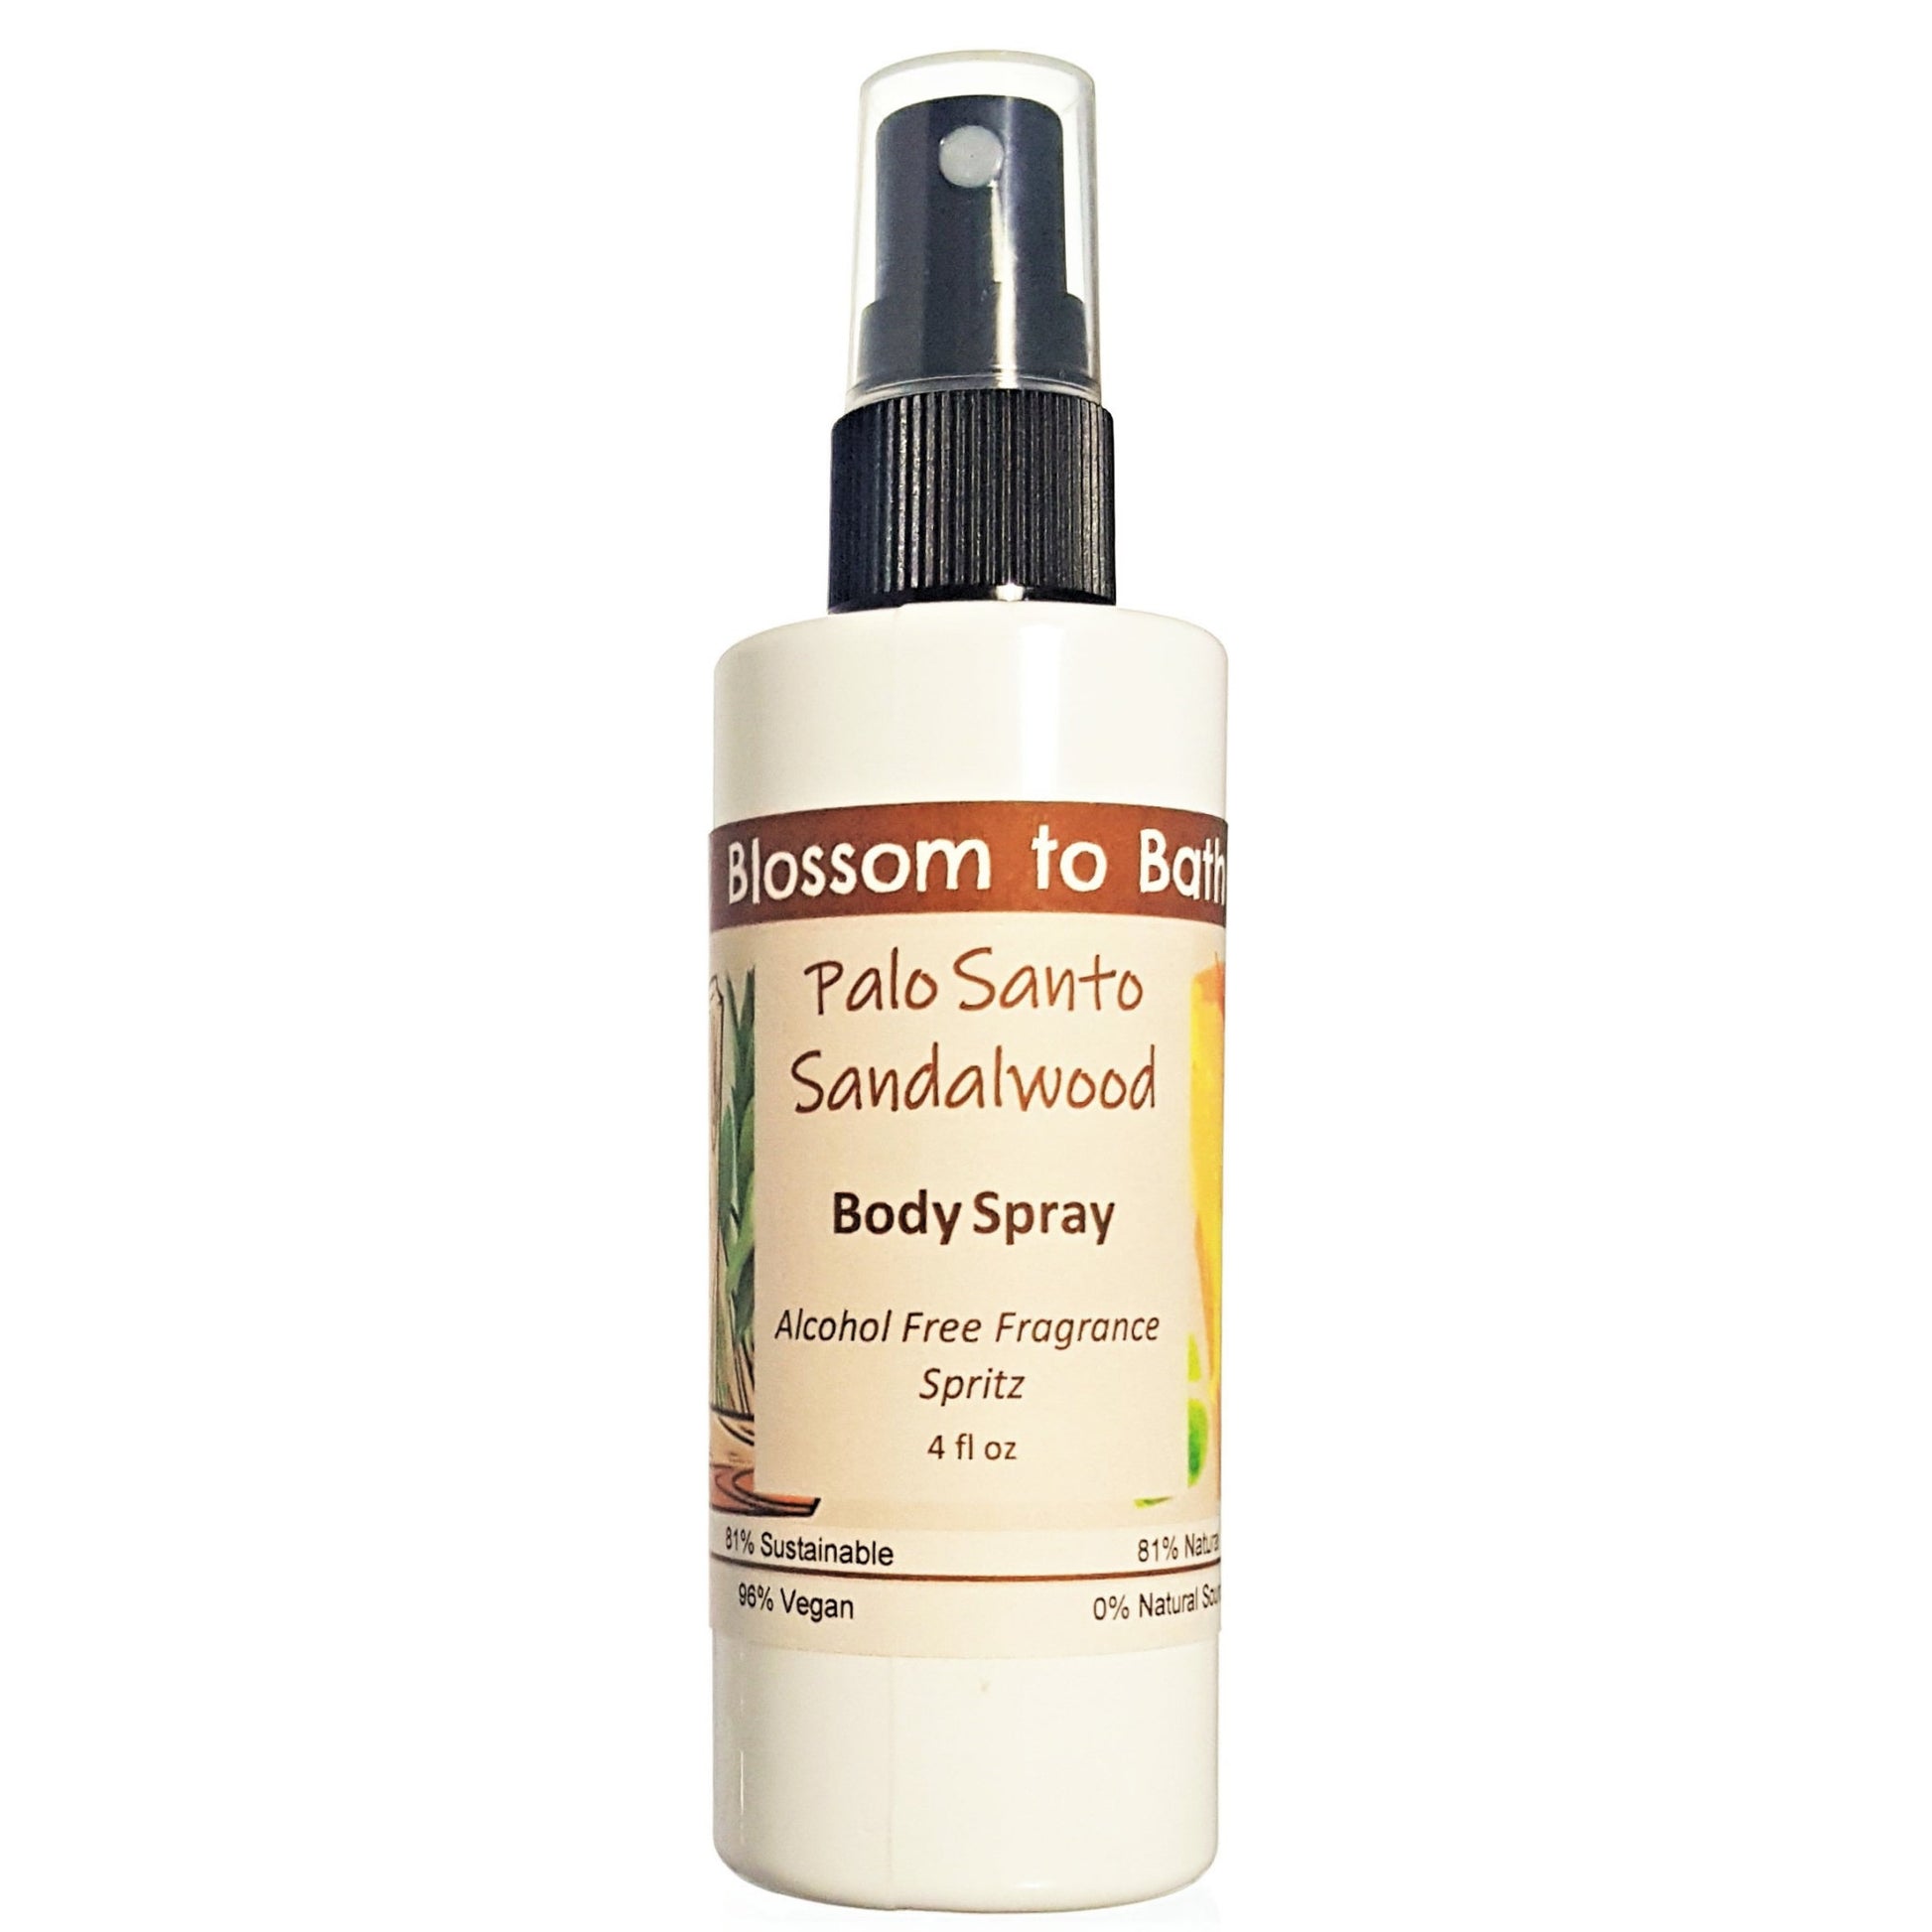 Buy Blossom to Bath Palo Santo Sandalwood Body Spray from Flowersong Soap Studio.  Natural  freshening of skin, linens, or air  A journey into the sacred, the exotic tones of this special blend resonate with warm woodiness that adds an uplifting vibration.